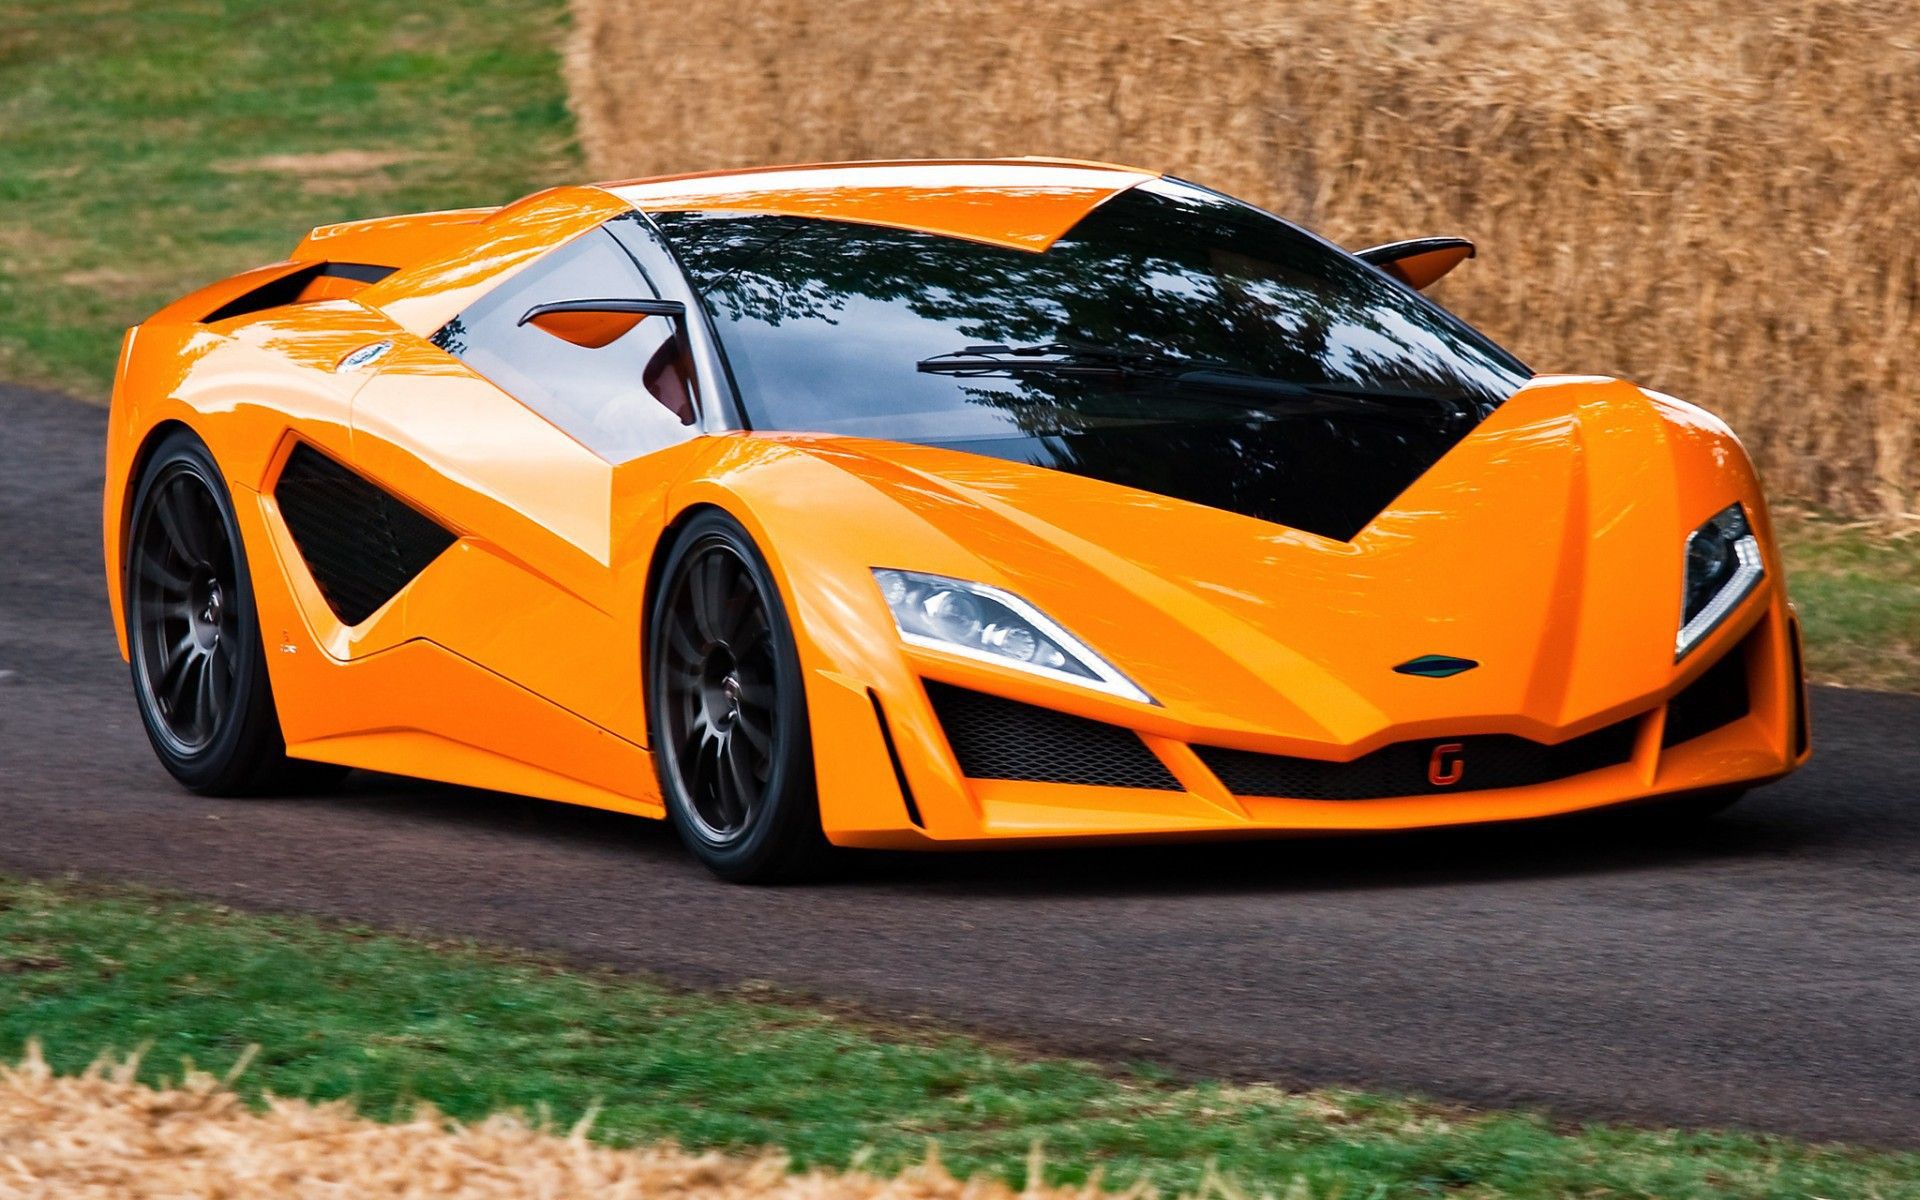 Orange car wallpaper and image, picture, photo